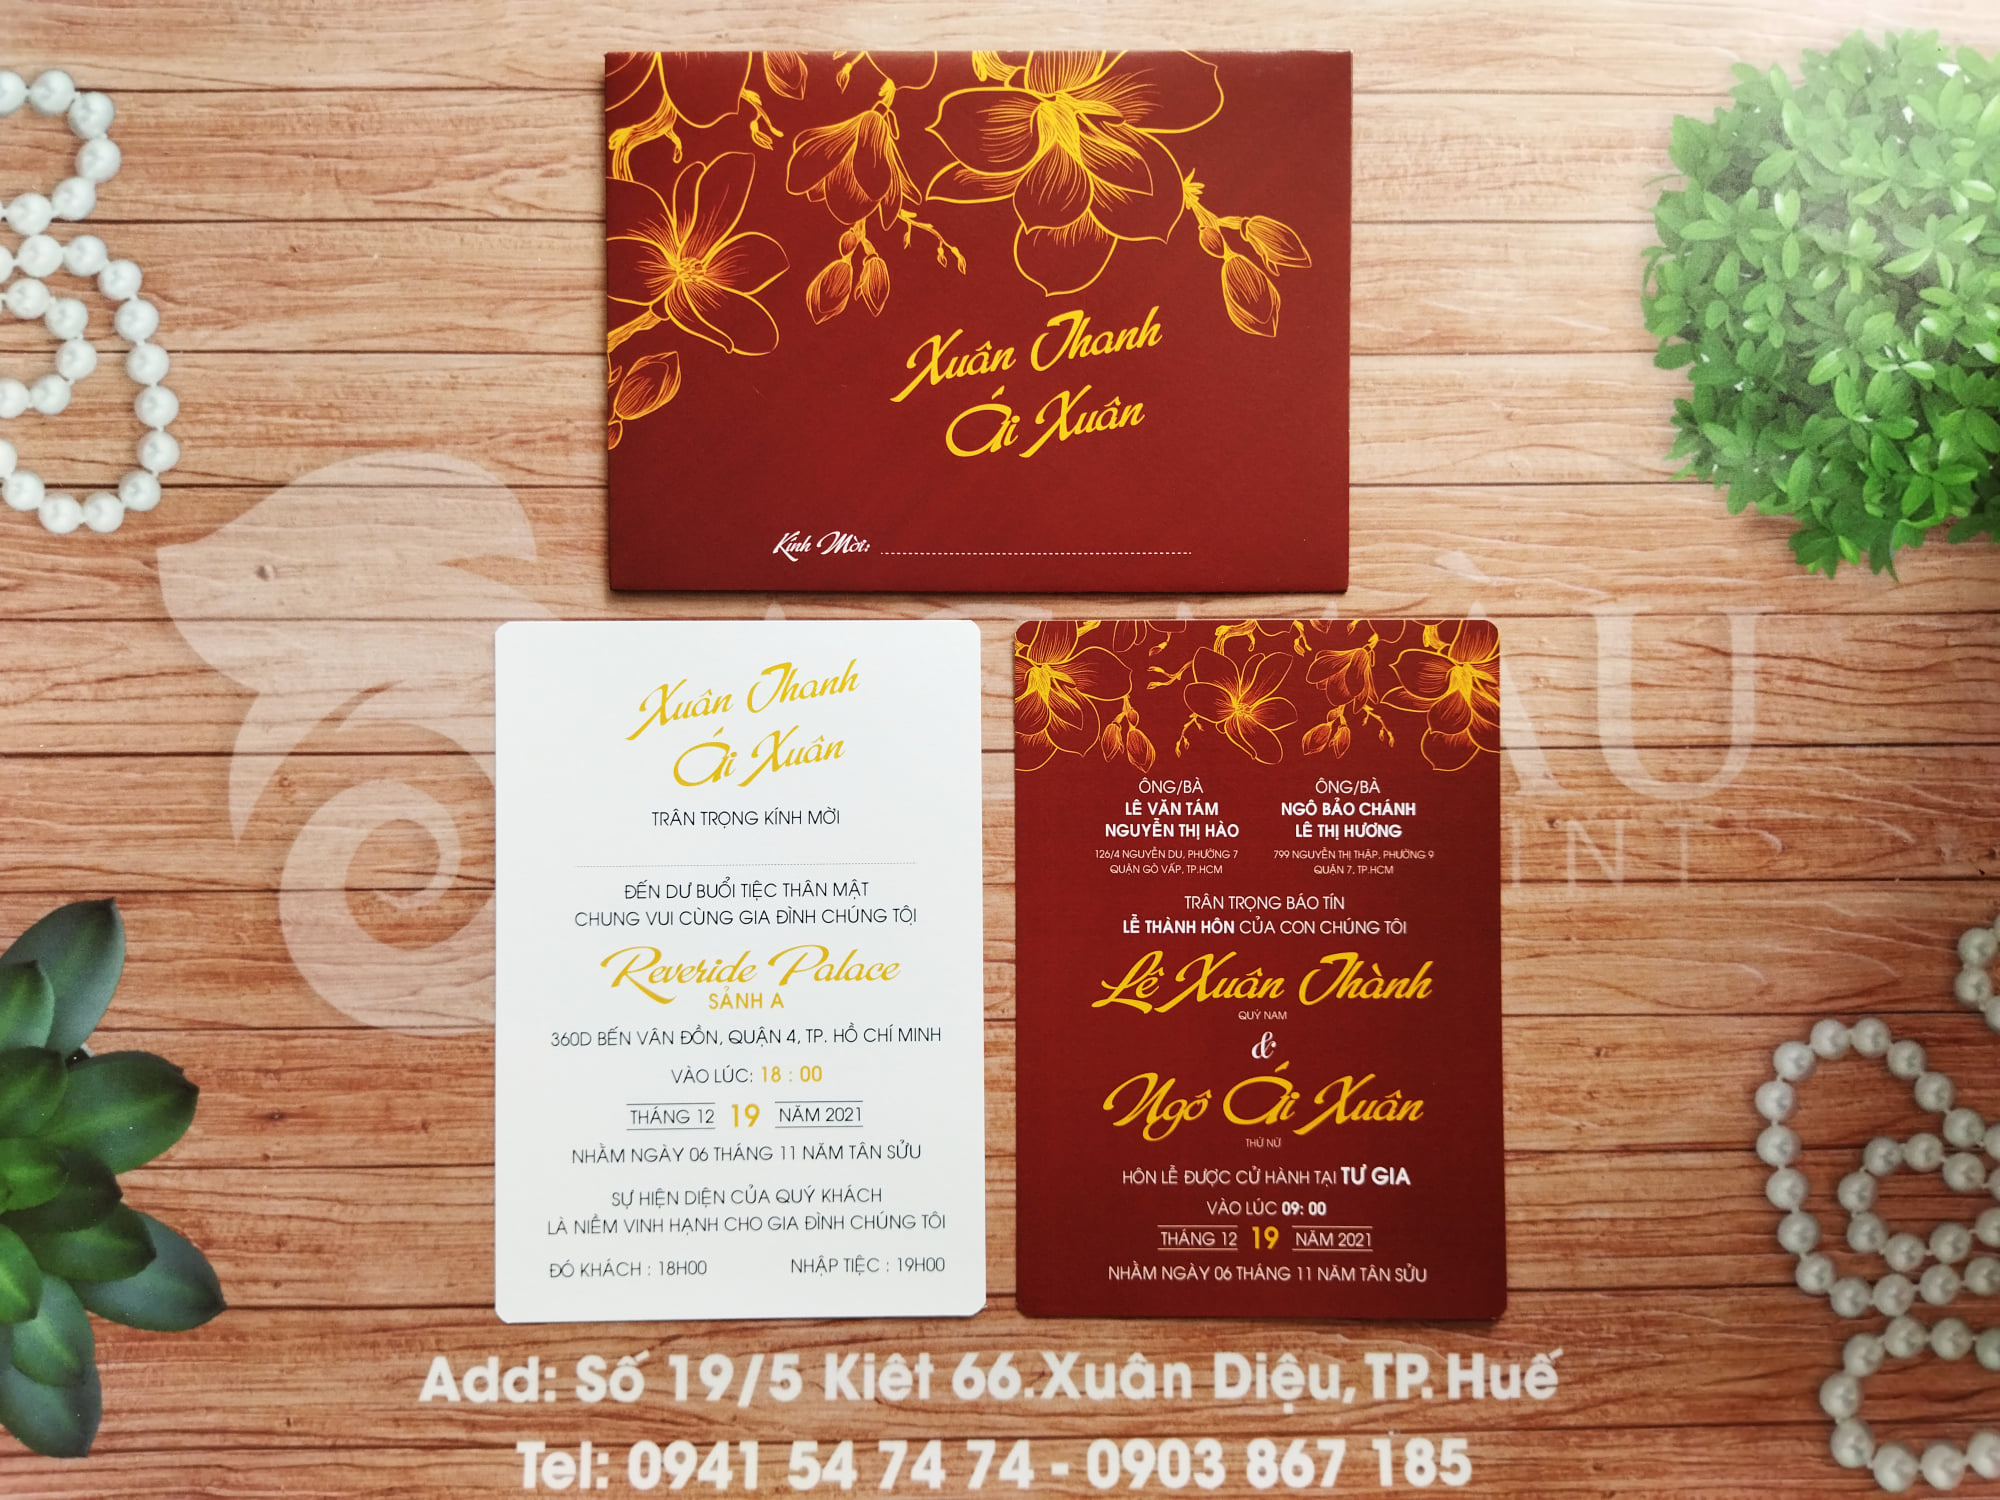 Thiệp cưới giá rẻ Huế: We understand the importance of finding quality wedding invitations at affordable prices. That\'s why we offer a wide selection of low-cost wedding invitations without compromising on quality. Our wedding invitations will give your guests a glimpse of your special day while fitting comfortably within your budget.